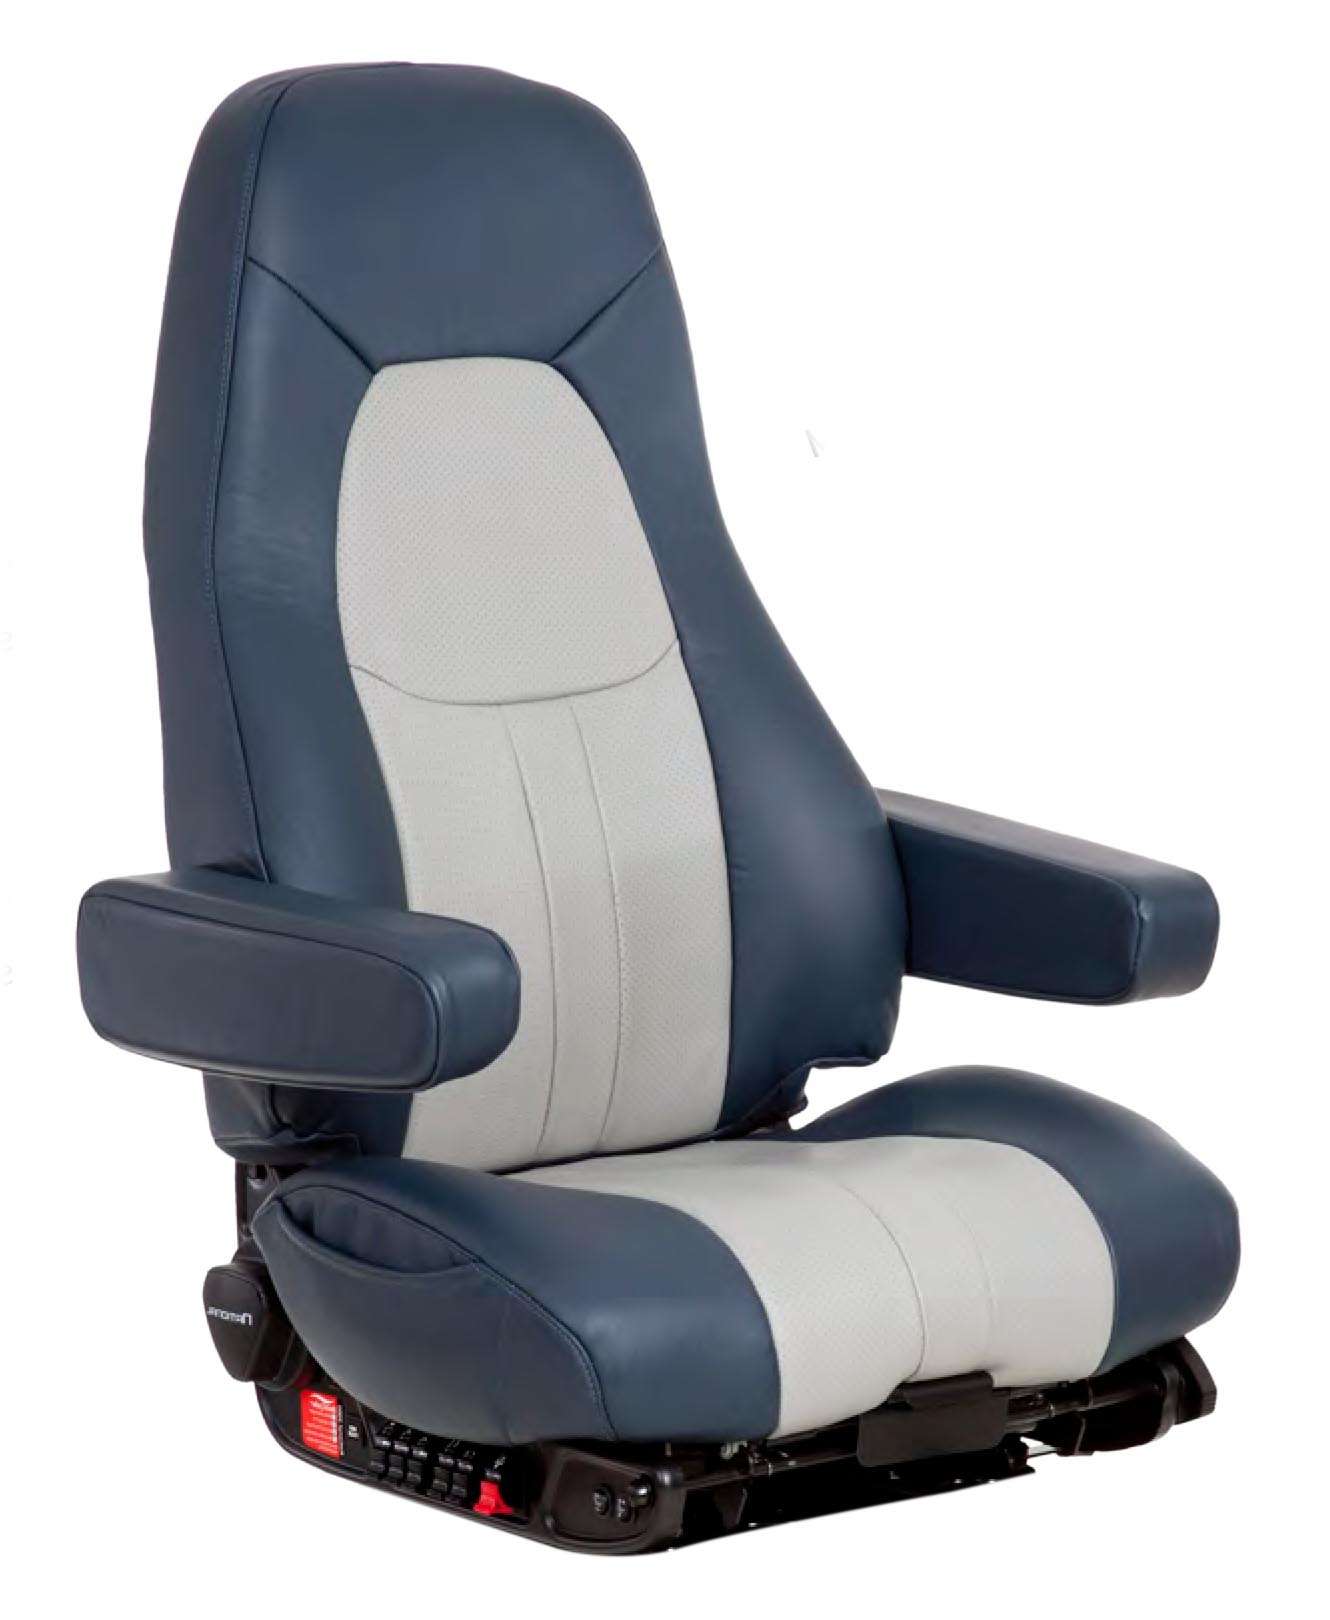 https://seatcovers.com/wp-content/uploads/2022/09/National-Hi-back-seat-cover-www.seatcovers.com_.jpg